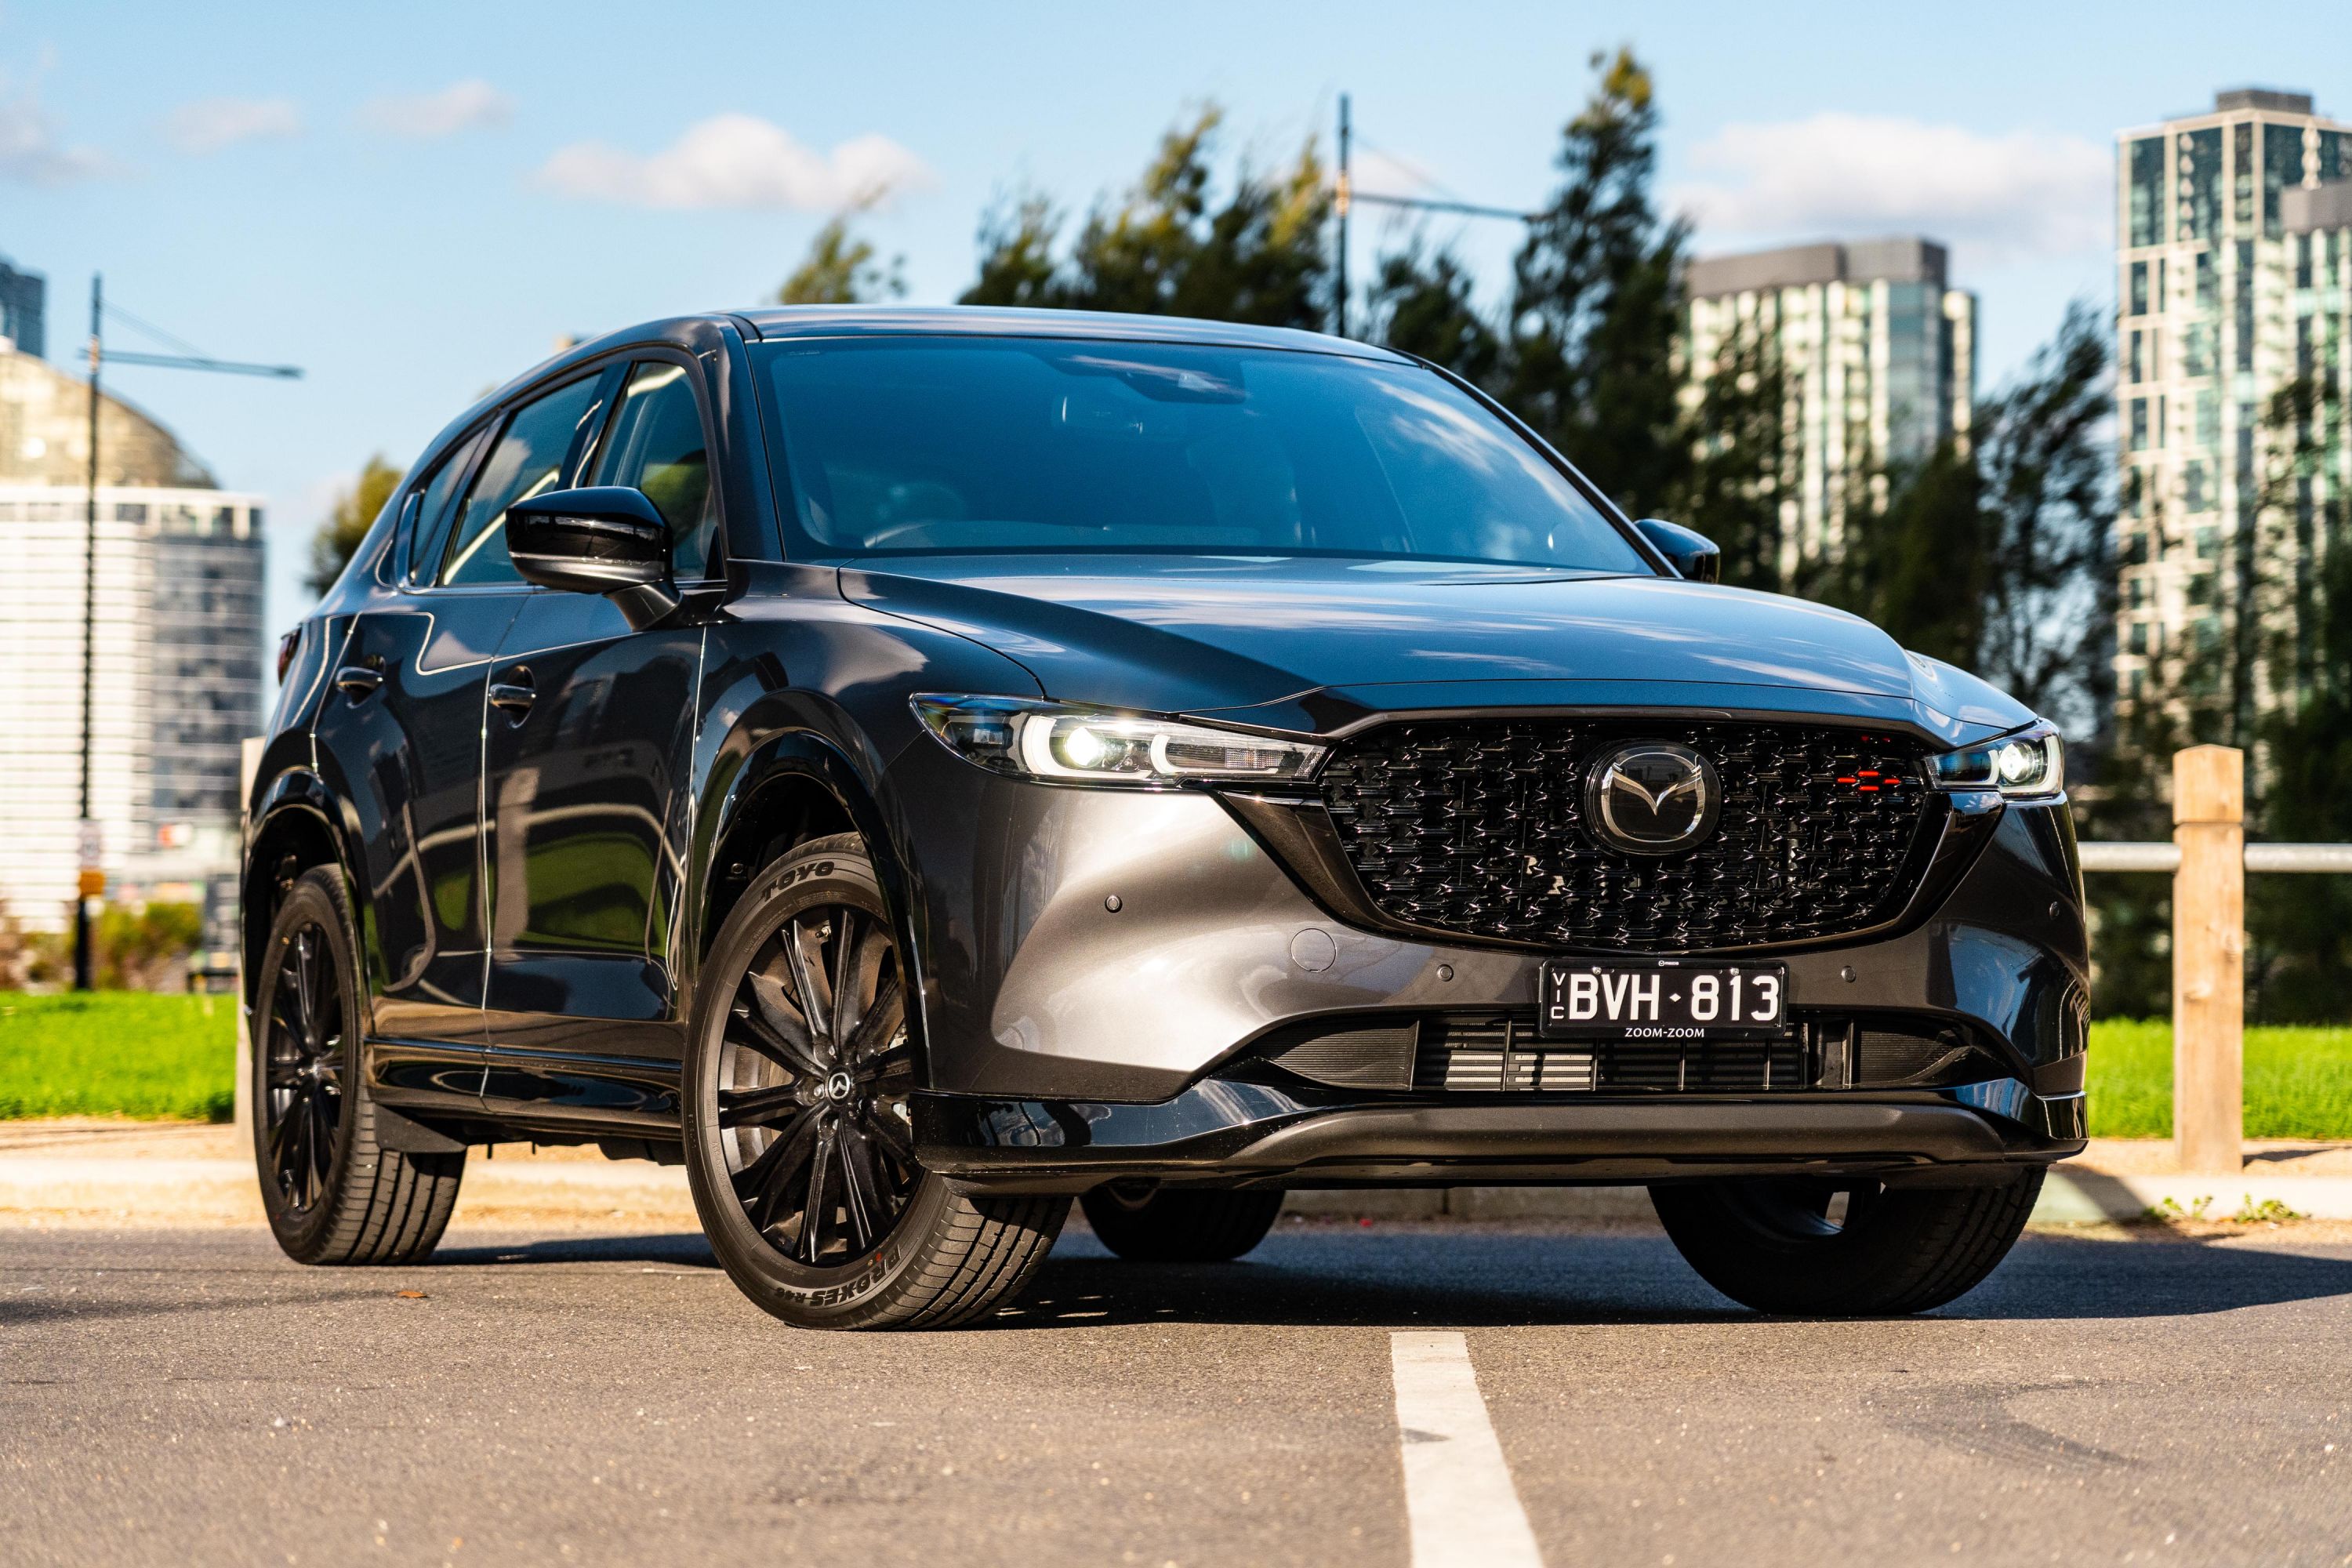 Review: The turbocharged Mazda CX-30 GT 2.5T crossover is in a